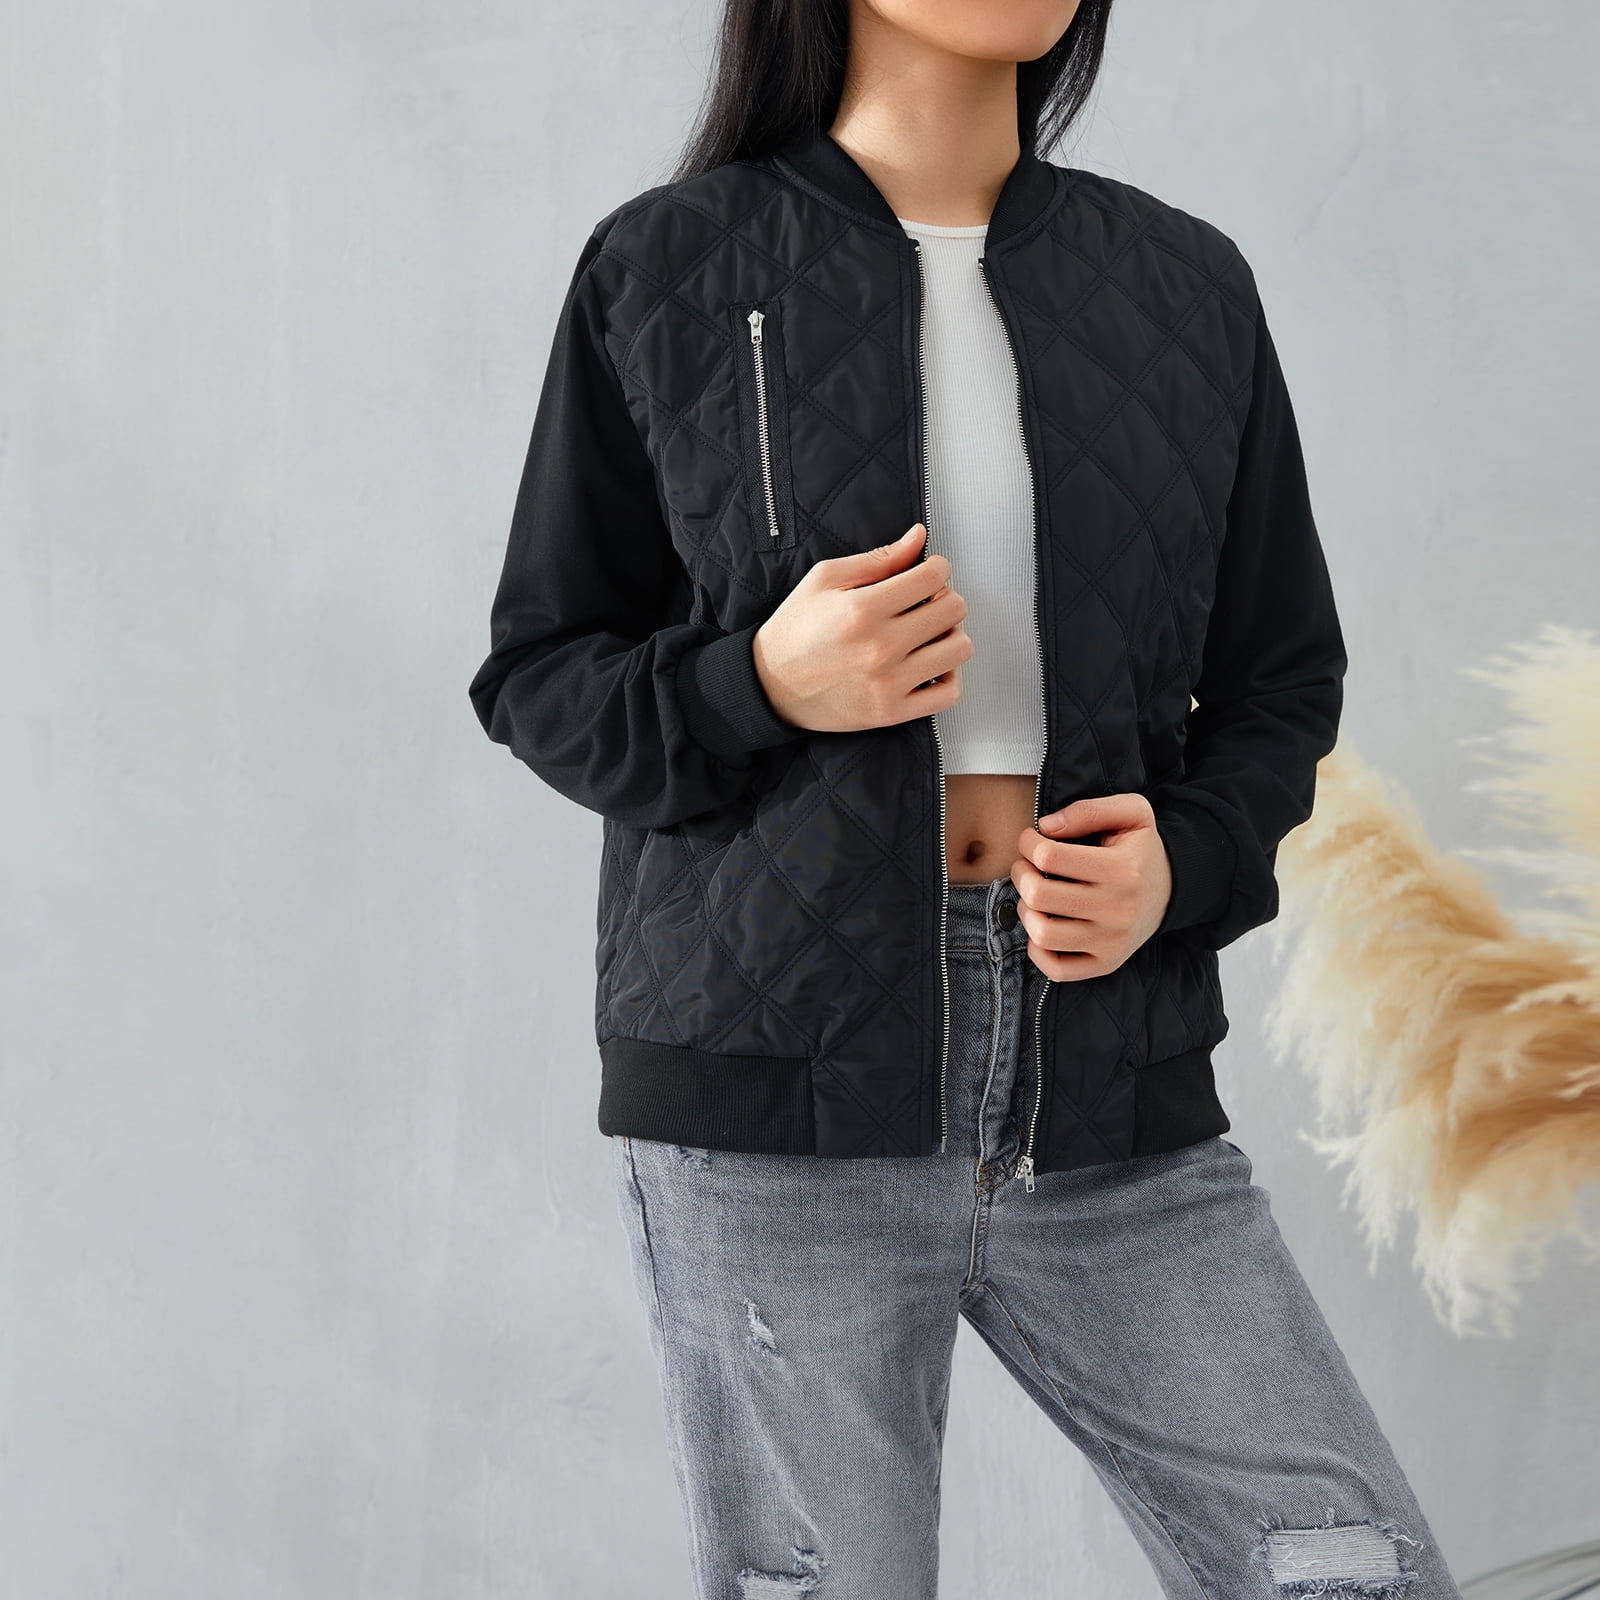 Leosoxs Womens Quilted Bomber Casual Jackets For Women Autumn/Winter Fashion,  Solid O Neck, Zipper Stitching, Plus Size From Clothingdh, $17.32